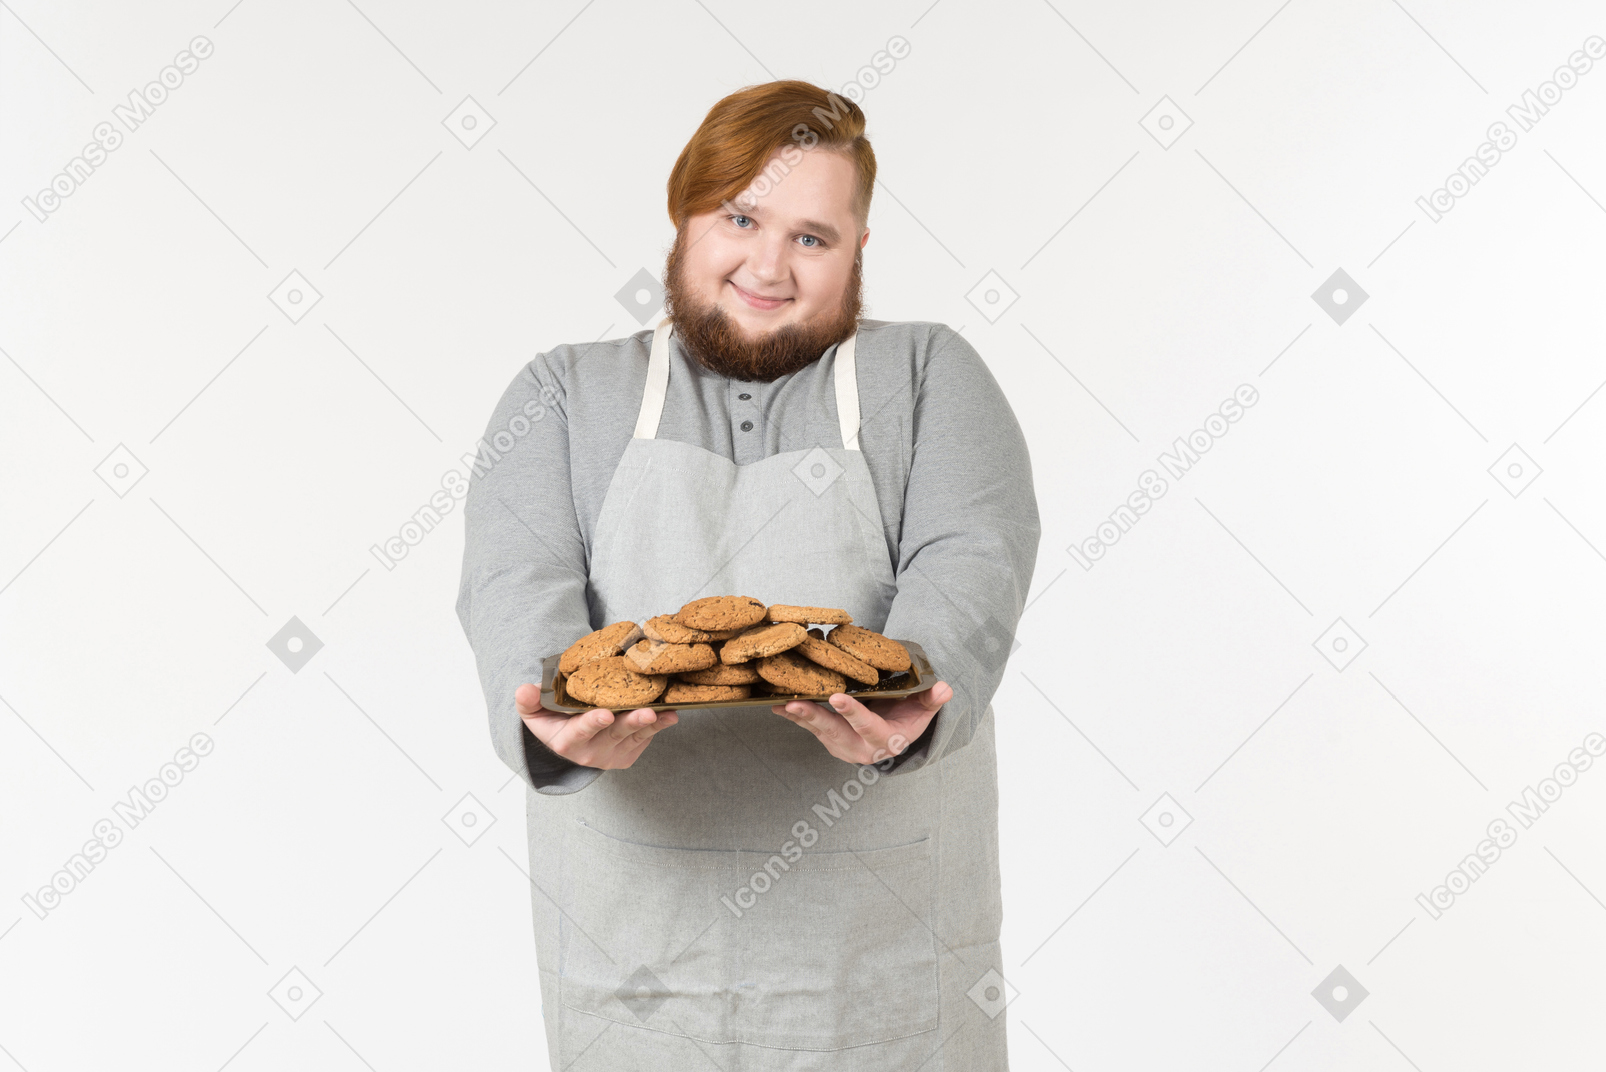 A smiling fat baker offering cookies